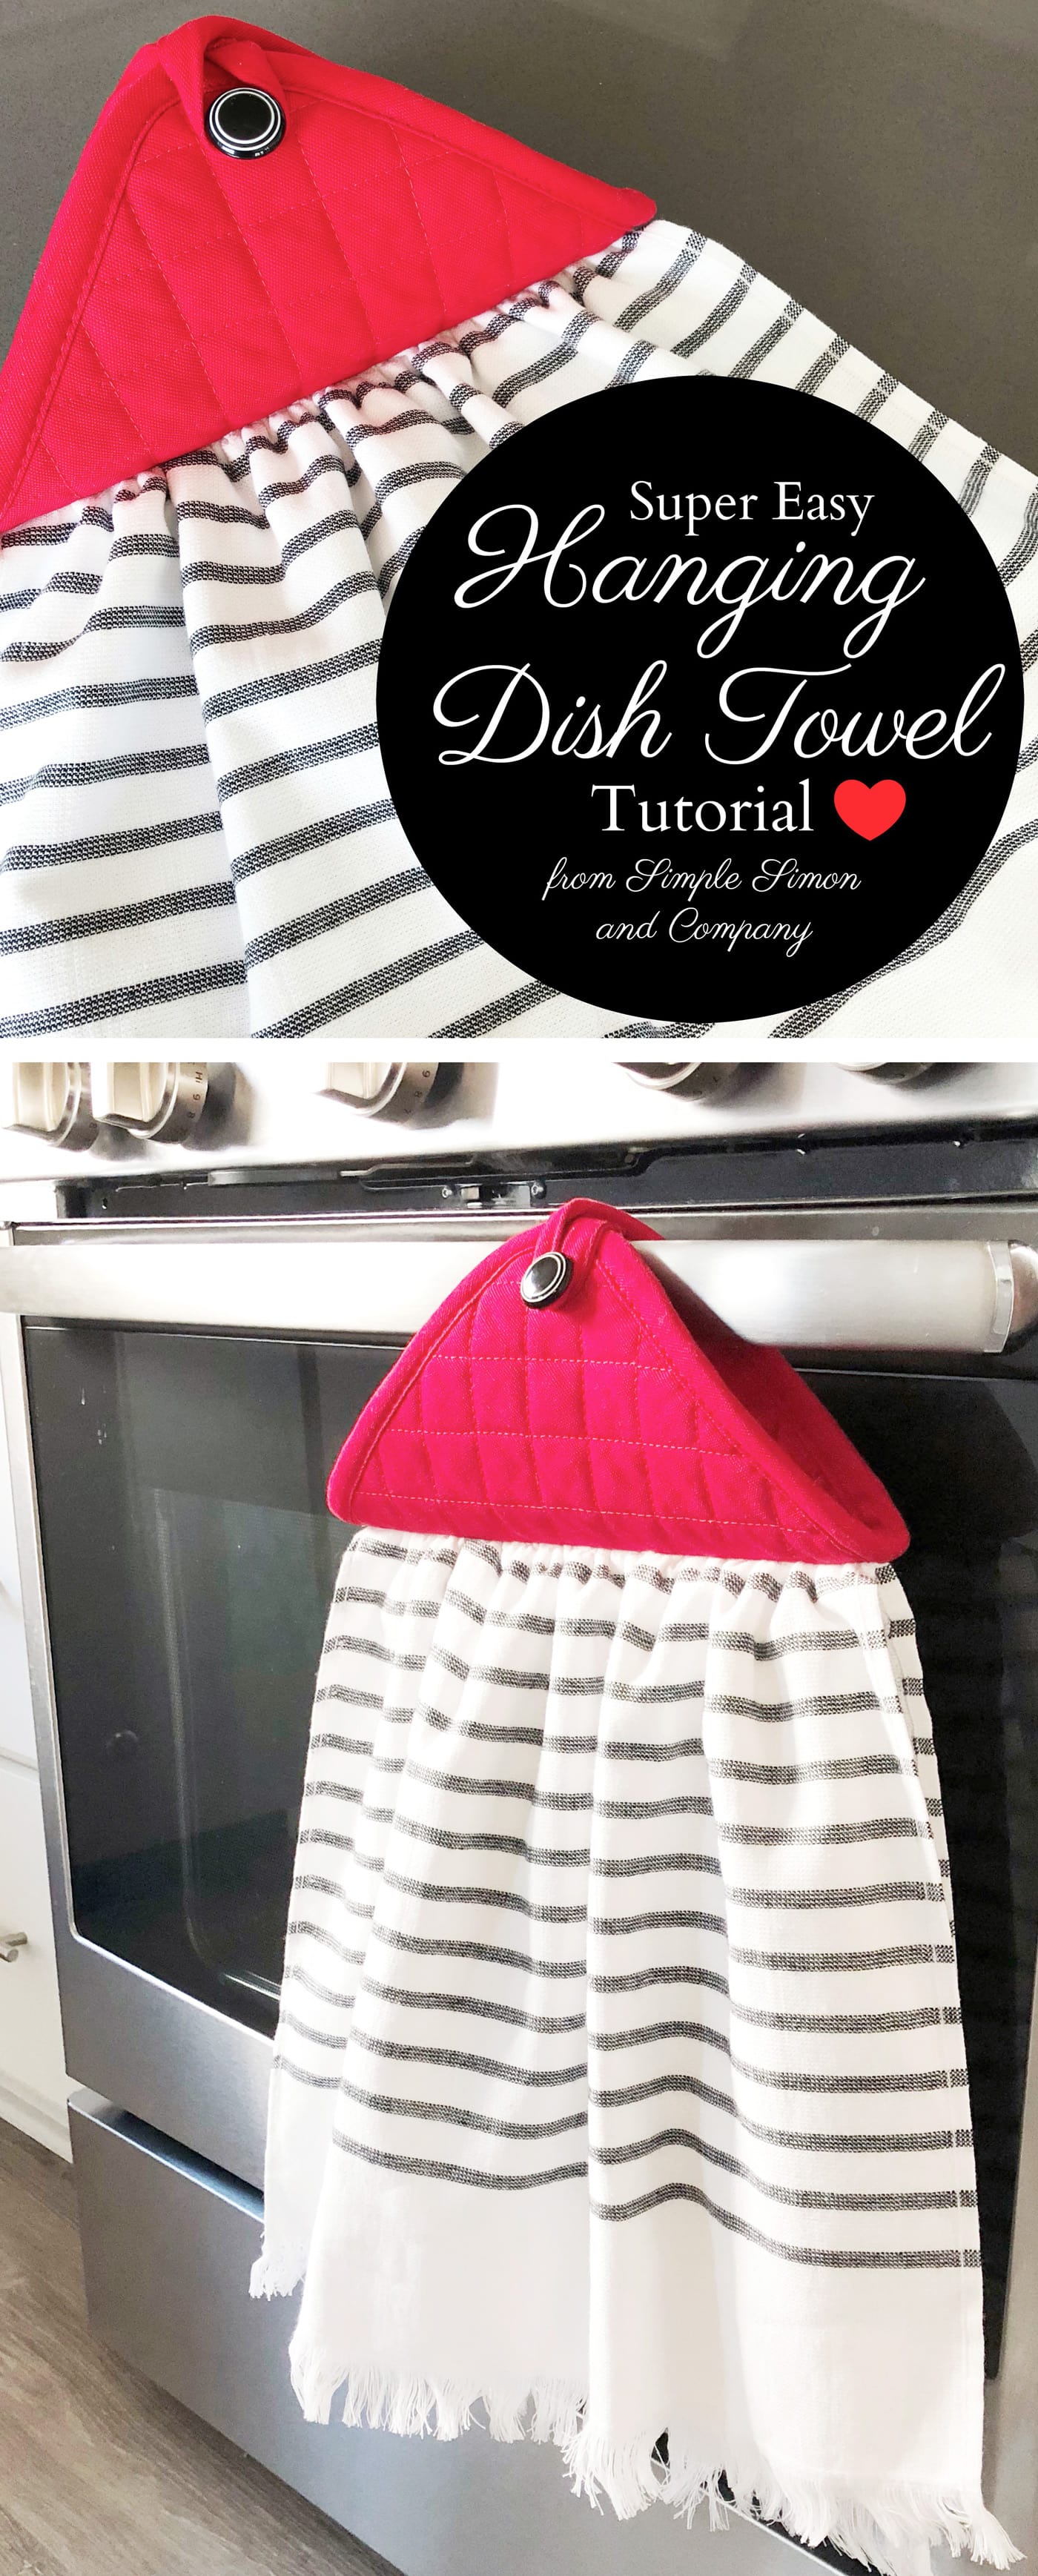 Libby's Lifestyle.: My modern style hanging kitchen towel tutorial.